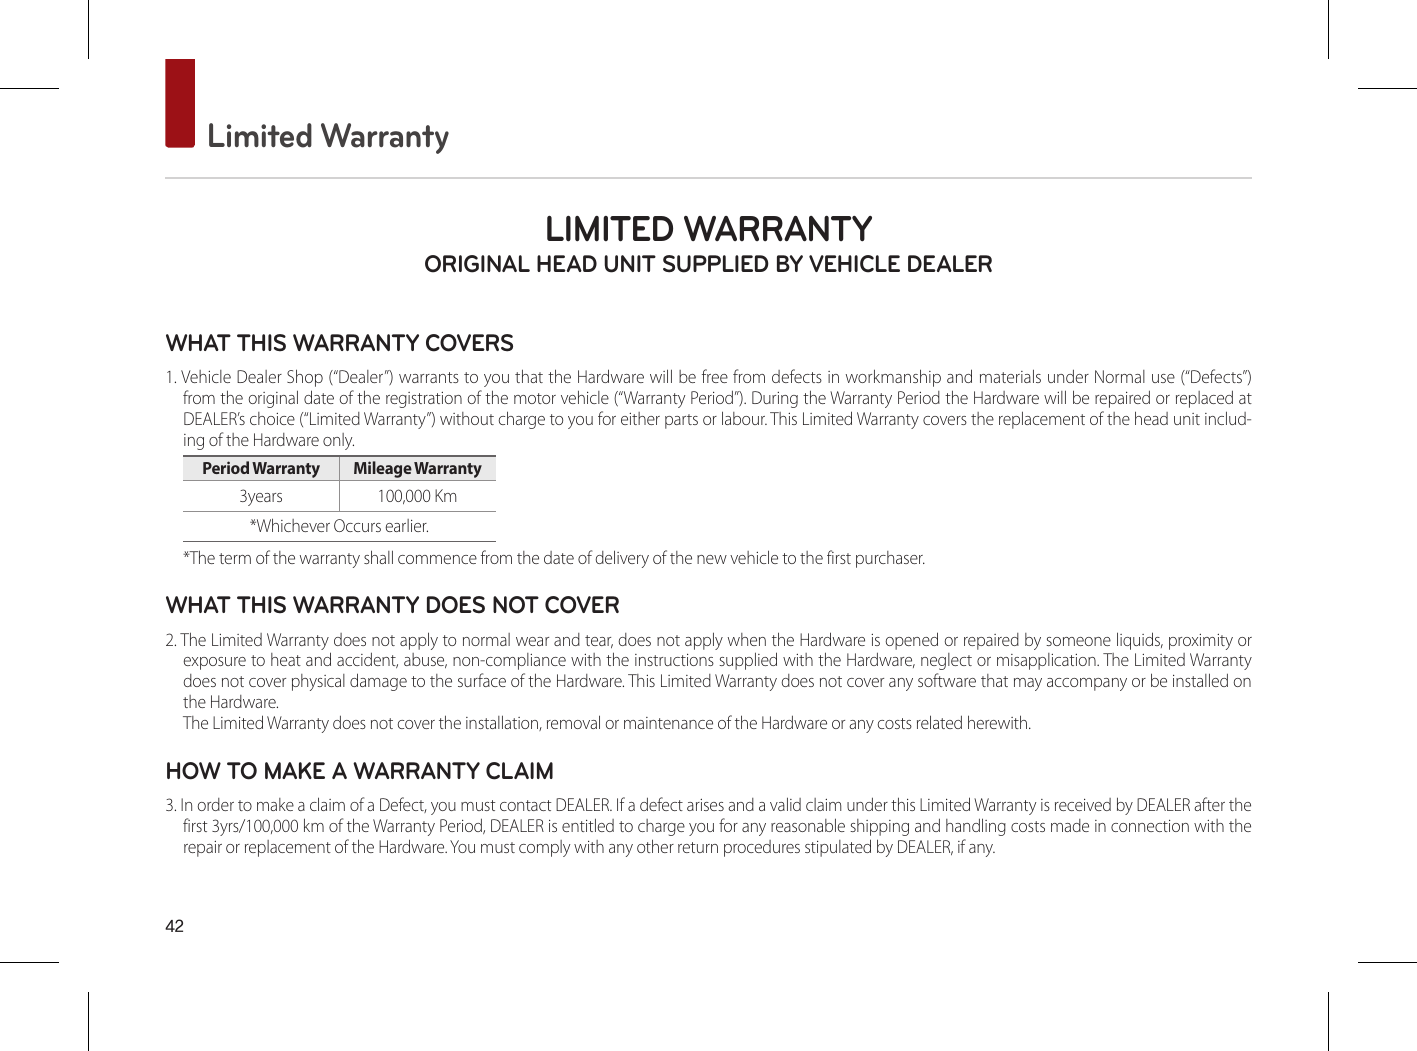 42 Limited WarrantyLIMITED WARRANTY ORIGINAL HEAD UNIT SUPPLIED BY VEHICLE DEALER WHAT THIS WARRANTY COVERS 1. Vehicle Dealer Shop (“Dealer”) warrants to you that the Hardware will be free from defects in workmanship and materials under Normal use (“Defects”) from the original date of the registration of the motor vehicle (“Warranty Period”). During the Warranty Period the Hardware will be repaired or replaced at DEALER’s choice (“Limited Warranty”) without charge to you for either parts or labour. This Limited Warranty covers the replacement of the head unit includ-ing of the Hardware only. Period Warranty  Mileage Warranty 3years  100,000 Km *Whichever Occurs earlier.*The term of the warranty shall commence from the date of delivery of the new vehicle to the first purchaser.WHAT THIS WARRANTY DOES NOT COVER 2. The Limited Warranty does not apply to normal wear and tear, does not apply when the Hardware is opened or repaired by someone liquids, proximity or exposure to heat and accident, abuse, non-compliance with the instructions supplied with the Hardware, neglect or misapplication. The Limited Warranty does not cover physical damage to the surface of the Hardware. This Limited Warranty does not cover any software that may accompany or be installed on the Hardware. The Limited Warranty does not cover the installation, removal or maintenance of the Hardware or any costs related herewith.HOW TO MAKE A WARRANTY CLAIM3. In order to make a claim of a Defect, you must contact DEALER. If a defect arises and a valid claim under this Limited Warranty is received by DEALER after the first 3yrs/100,000 km of the Warranty Period, DEALER is entitled to charge you for any reasonable shipping and handling costs made in connection with the repair or replacement of the Hardware. You must comply with any other return procedures stipulated by DEALER, if any.